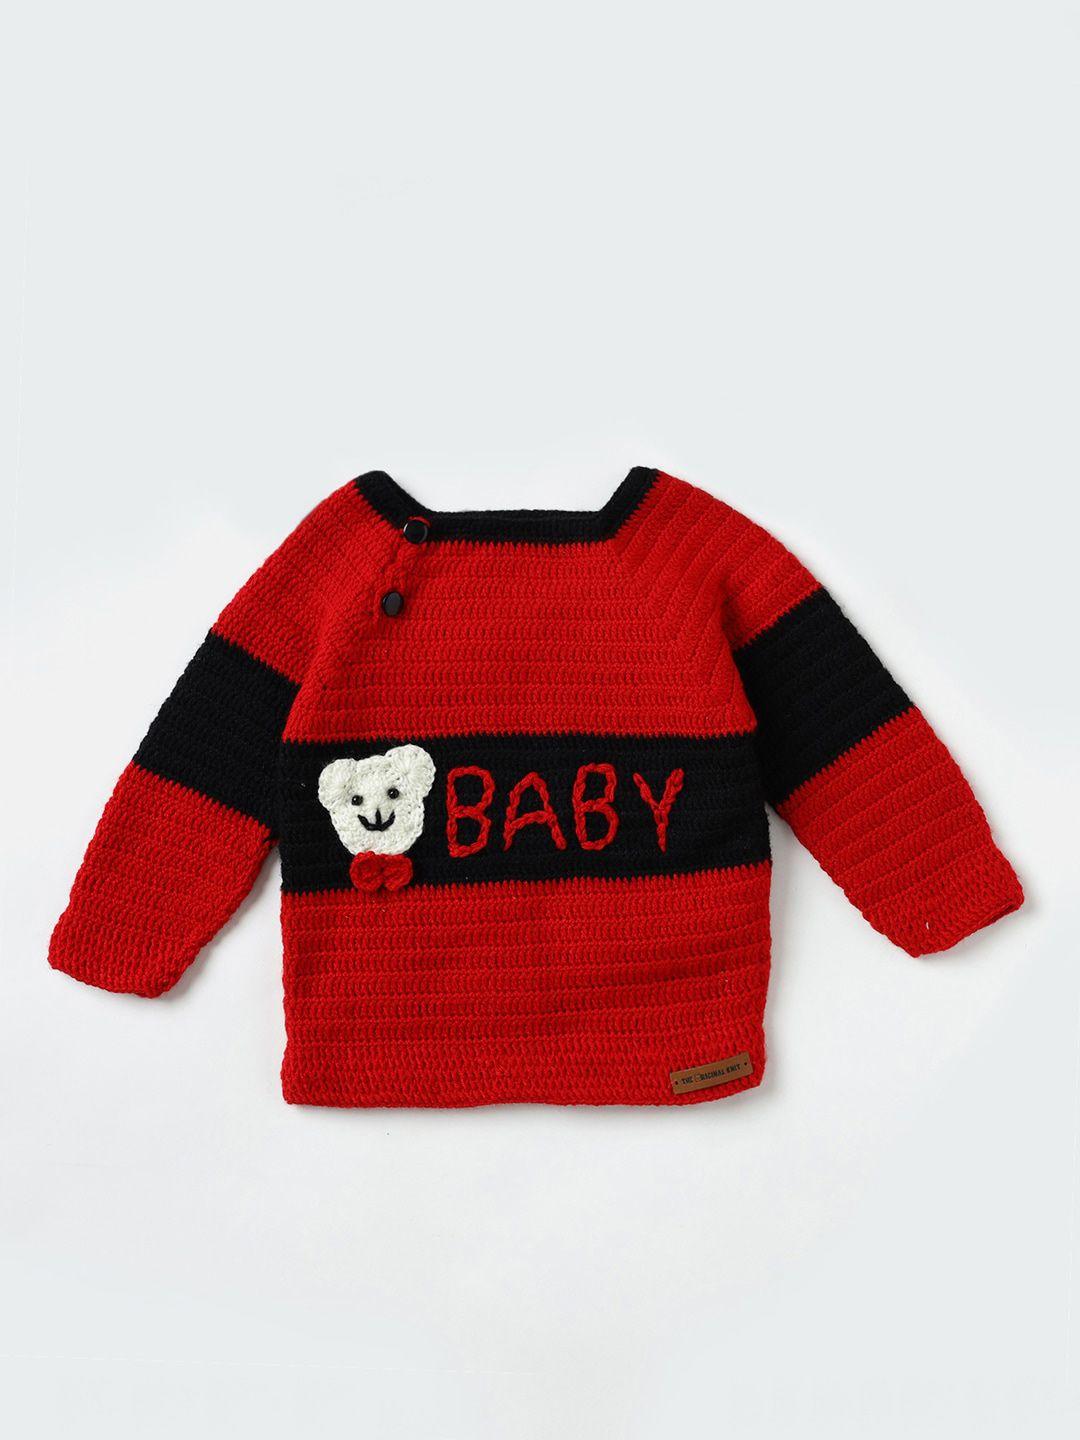 the original knit unisex kids red & black embroidered pullover